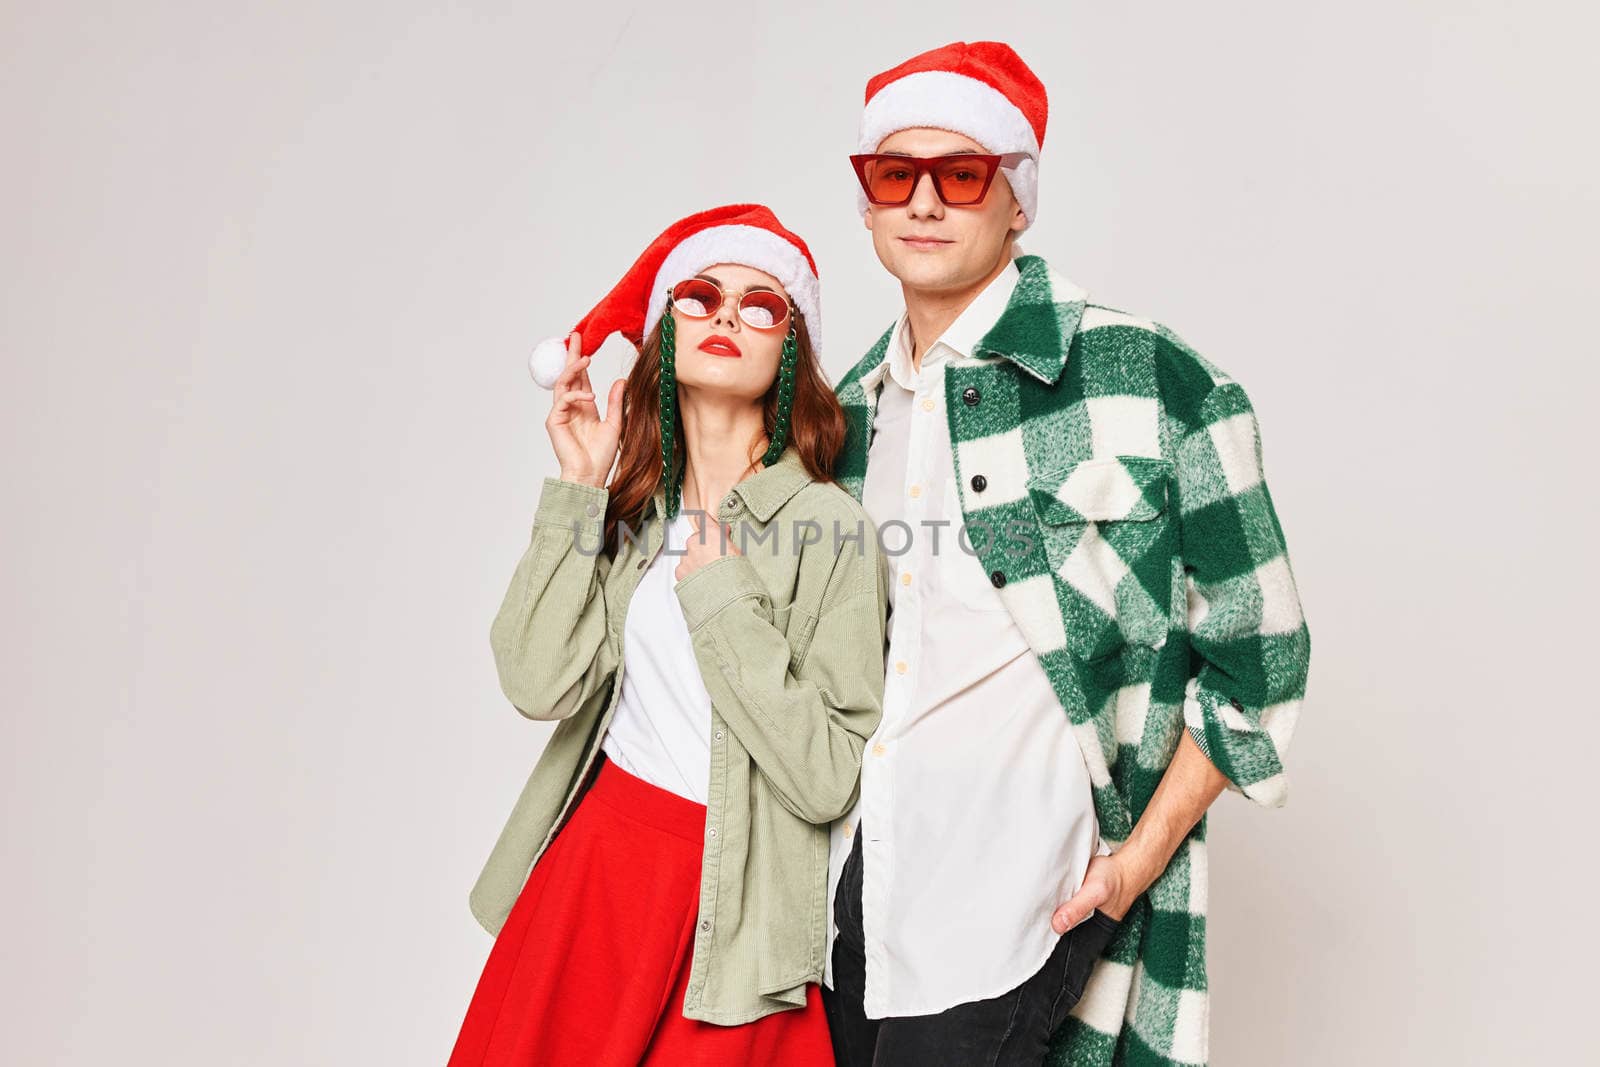 men and women new year sunglasses christmas studio together. High quality photo